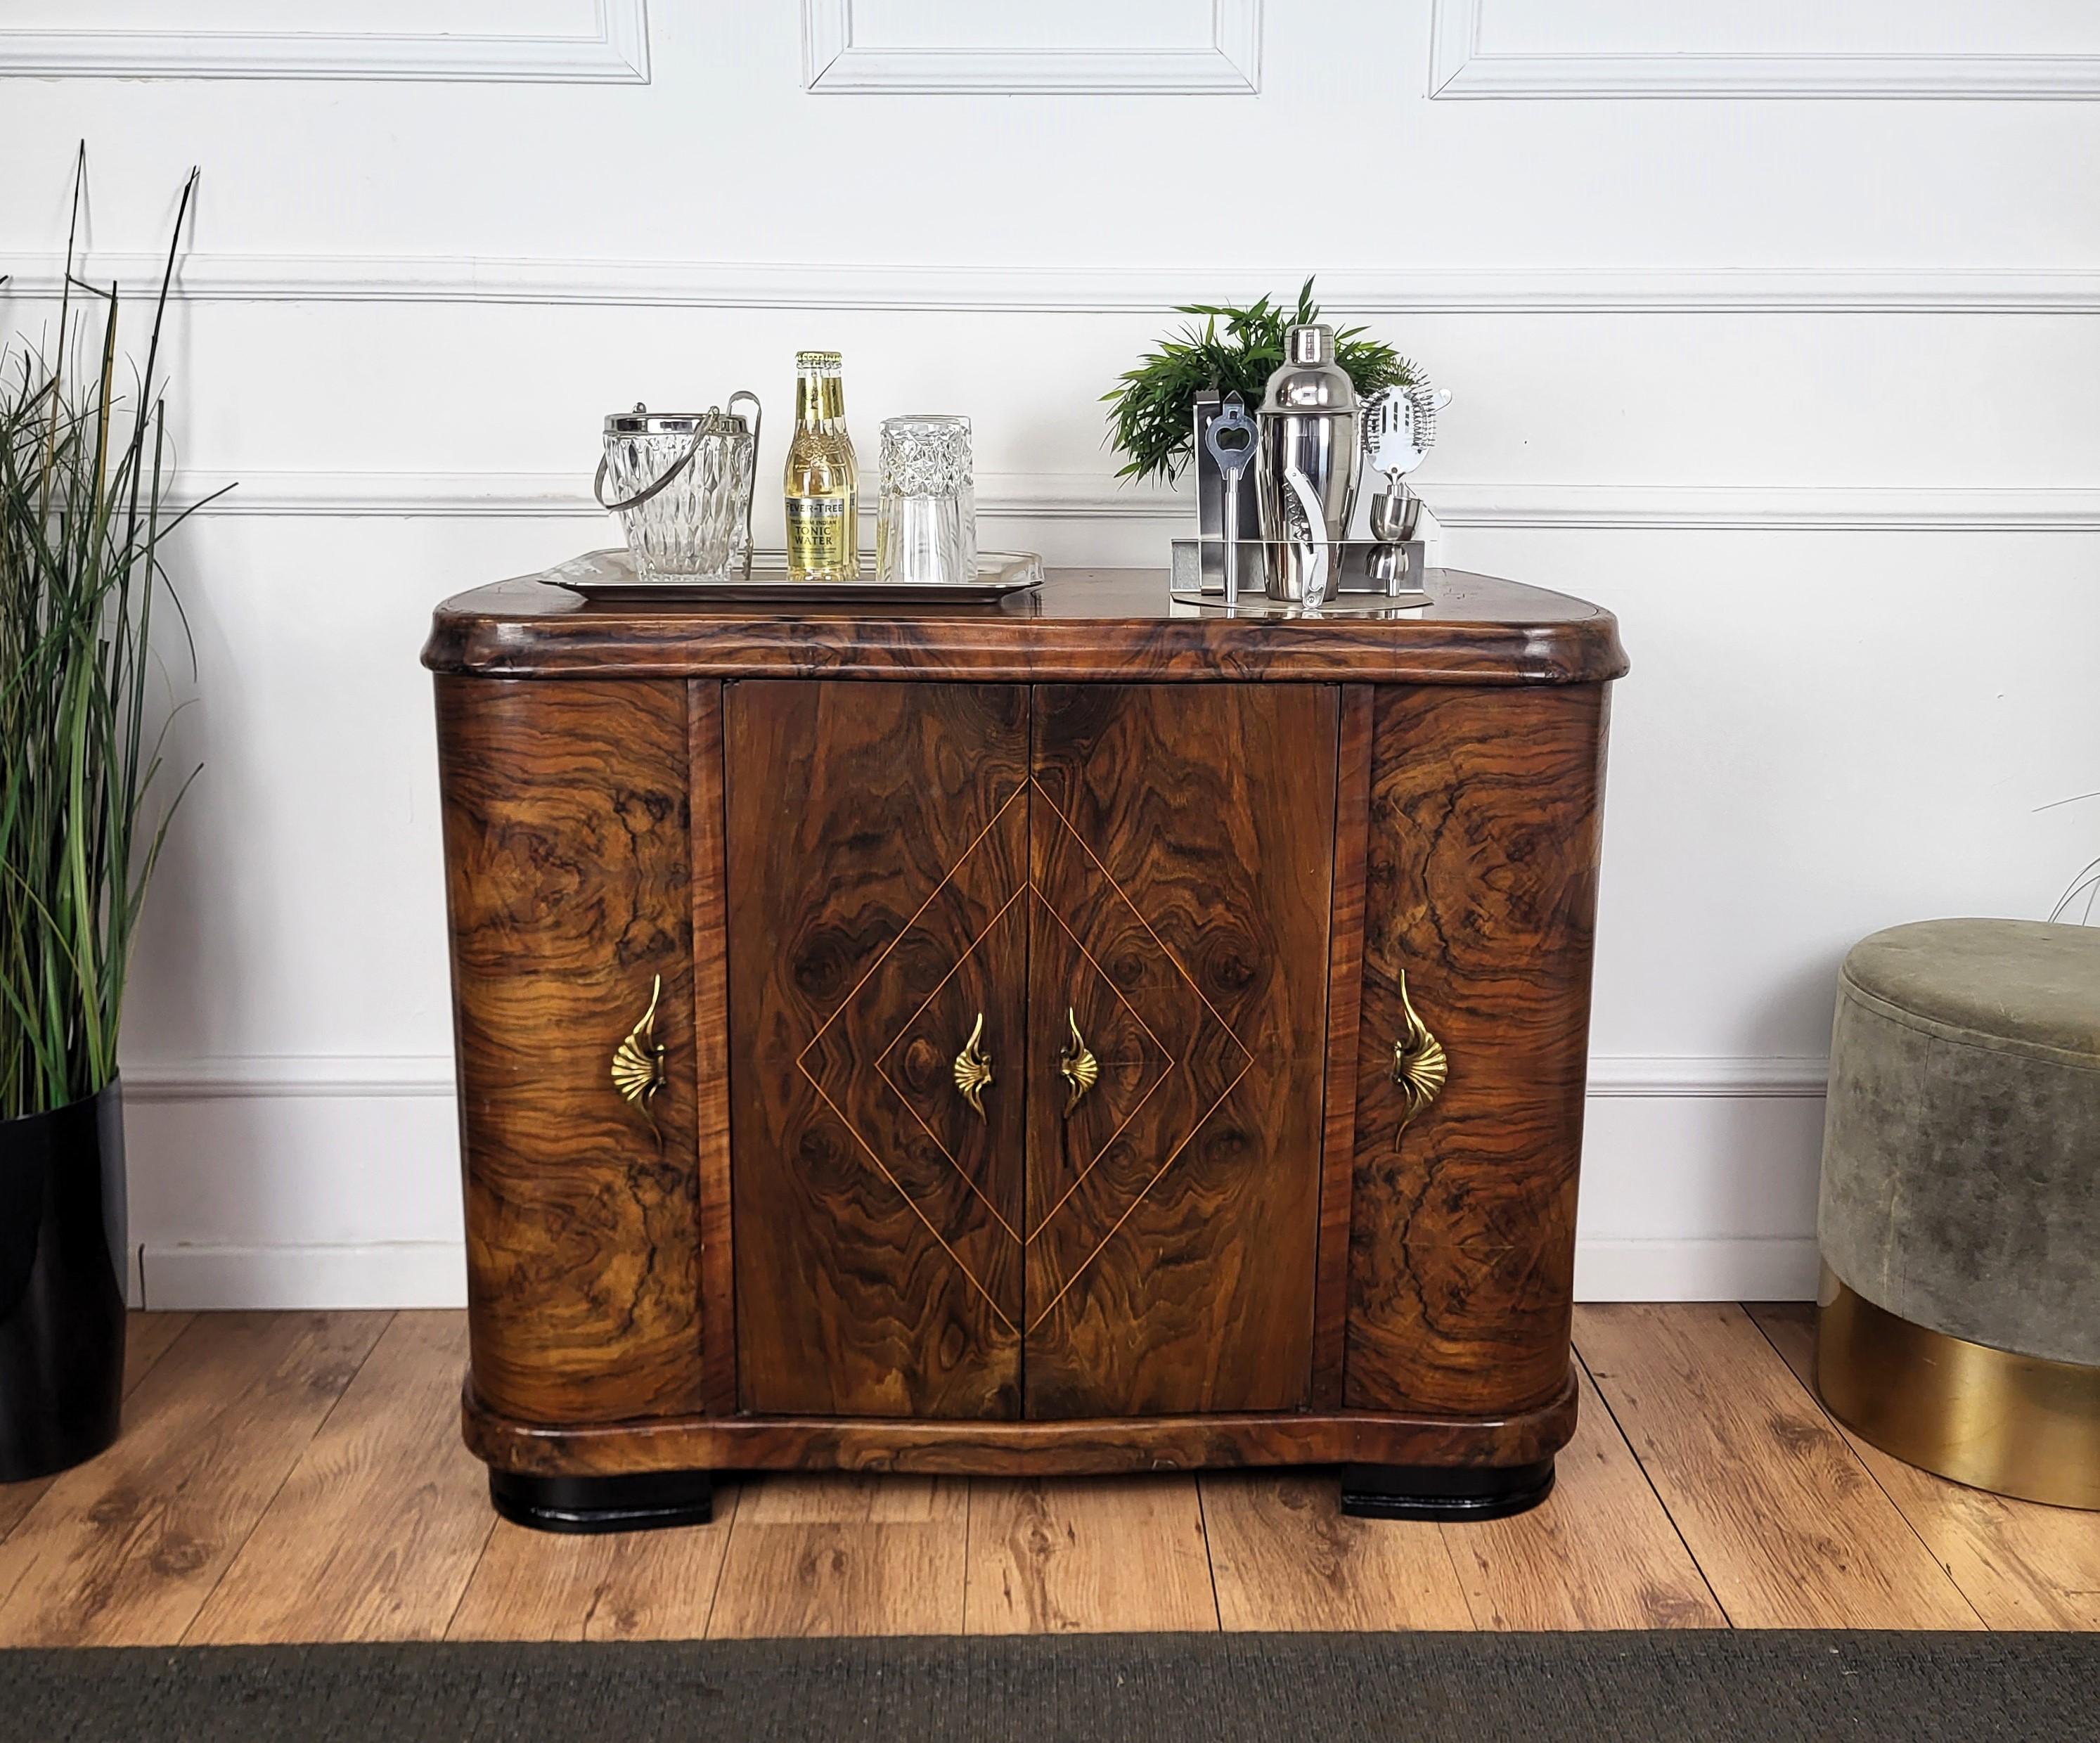 Very elegant Italian Art Deco Mid-Century Modern drinks dry bar cabinet with beautiful veneer walnut briar burl wood, two side doors and two central doors all detailed by great wooden decor craftmanship and the brass handles. When opened, on the